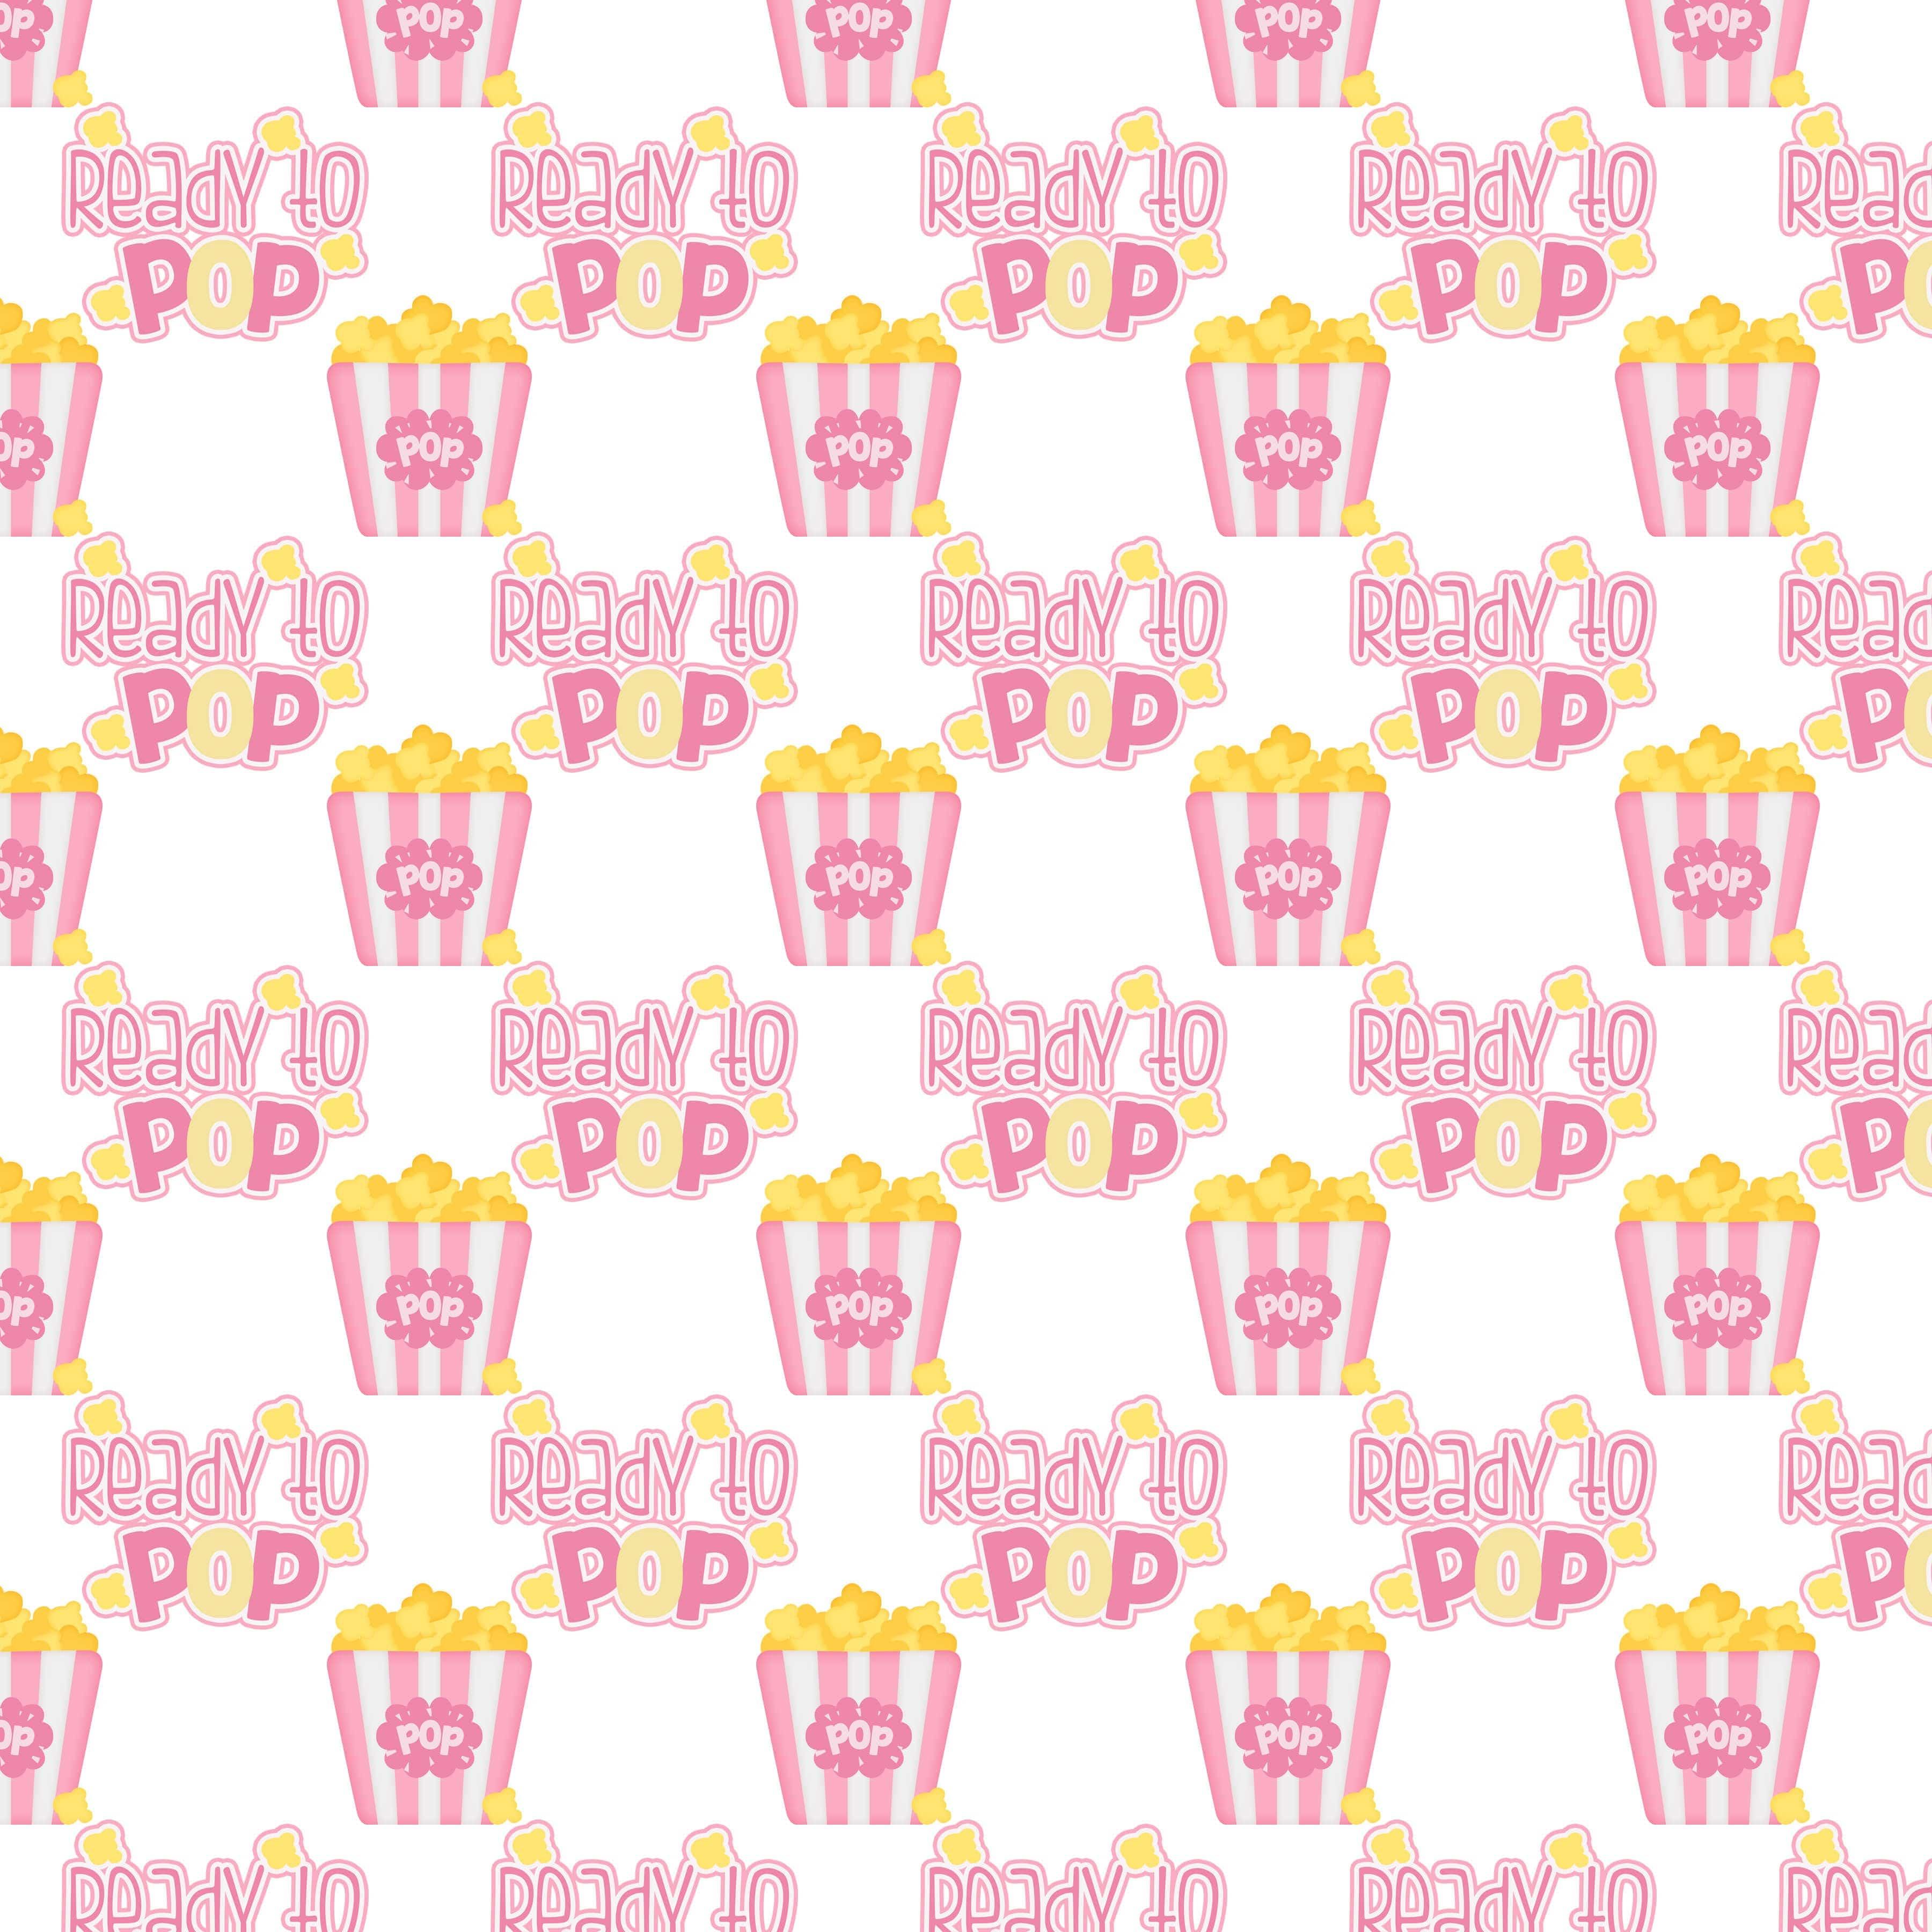 Ready To Pop Collection Ready To Pop Girl 12 x 12 Double-Sided Scrapbook Paper by SSC Designs - Scrapbook Supply Companies